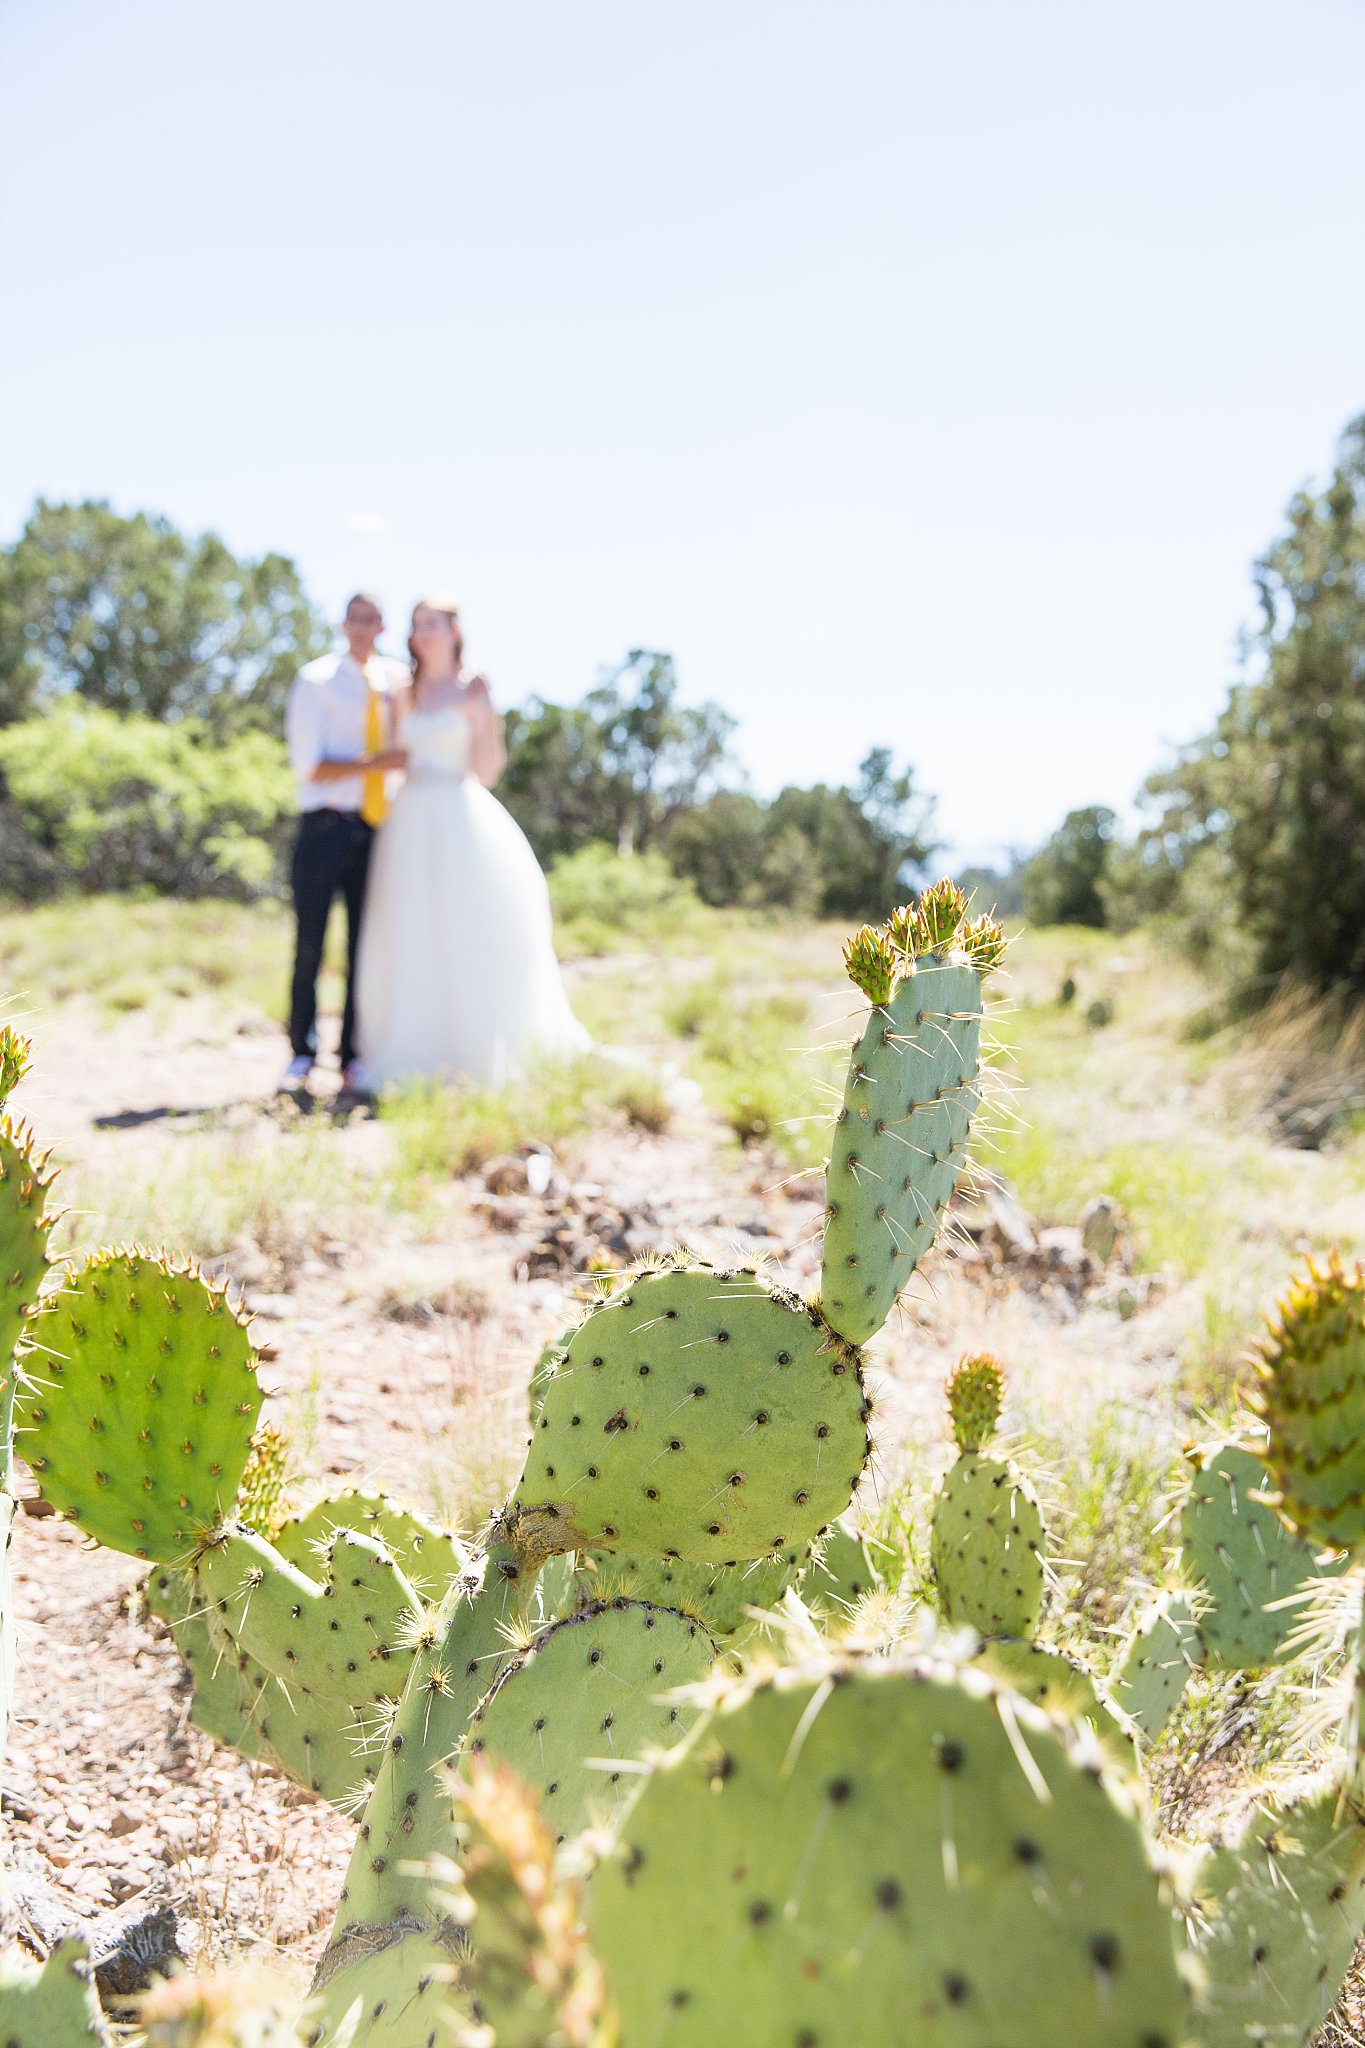 Bride and groom walking together in the background of a cactus by Arizona wedding photographer PMA Photography.